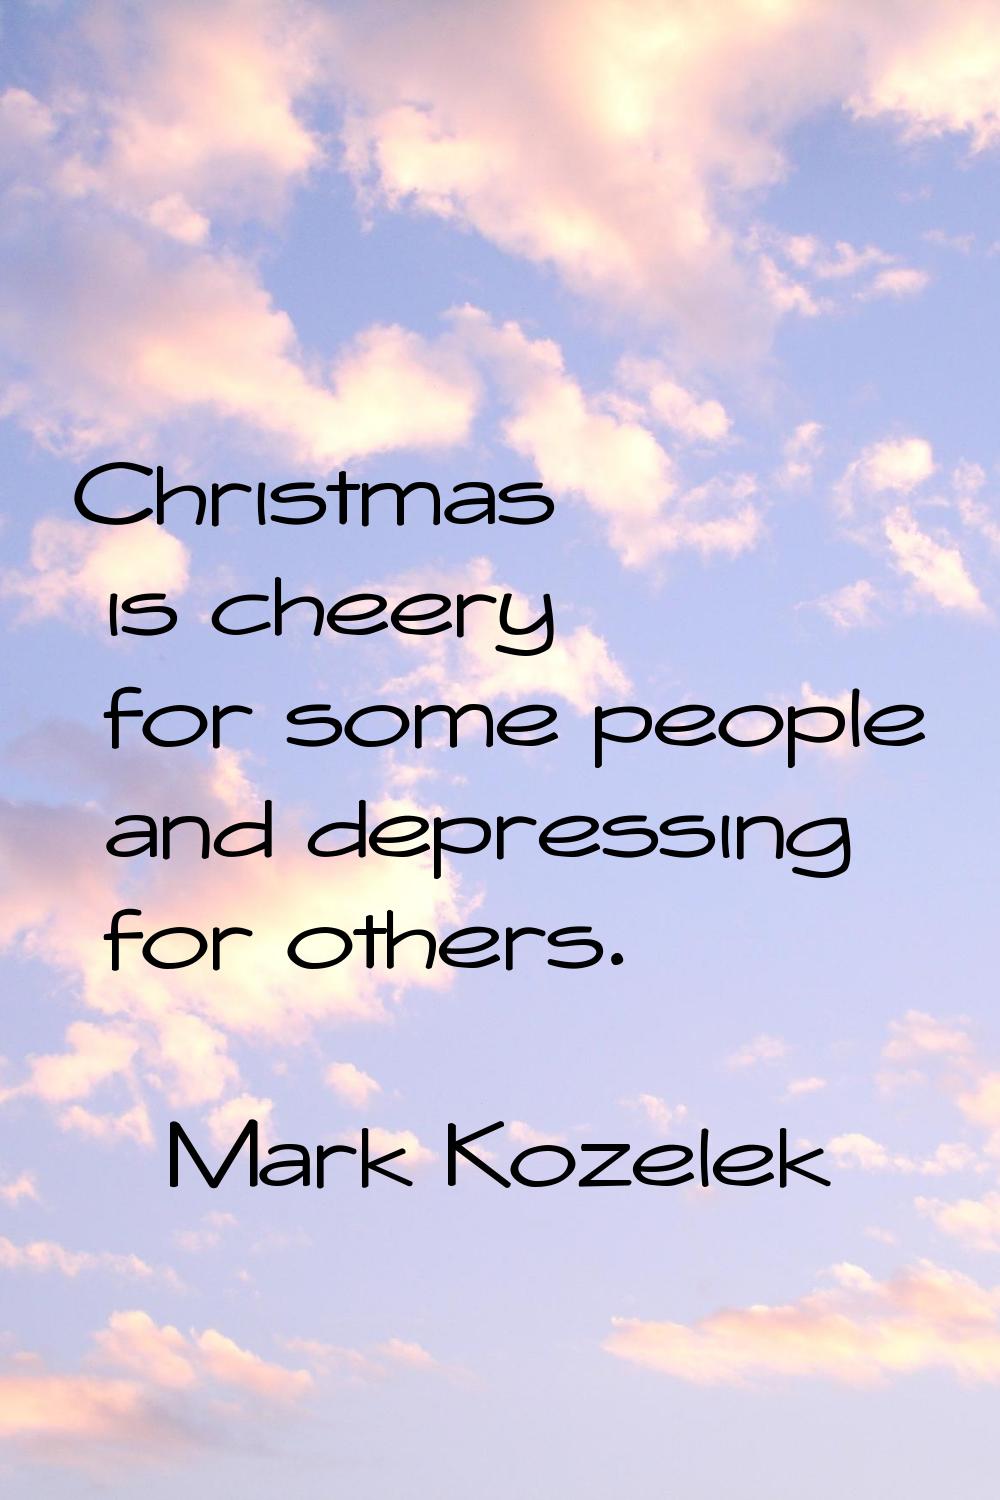 Christmas is cheery for some people and depressing for others.